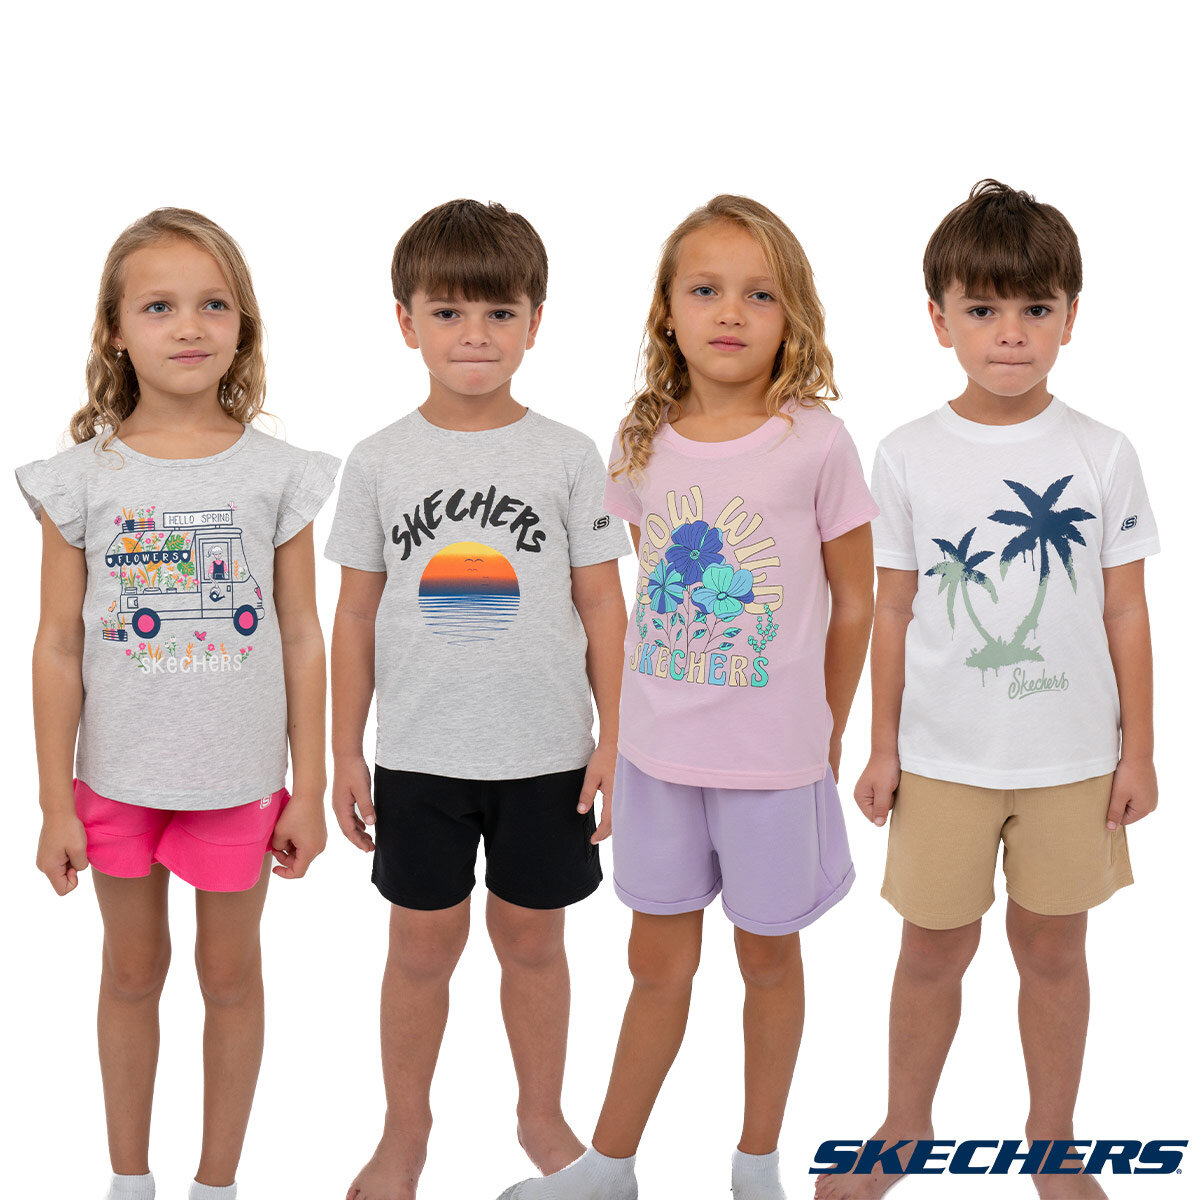 Skechers Kids 3 Piece Set with x2 T-Shirts and x1 Short in 4 Colours & 6 Sizes